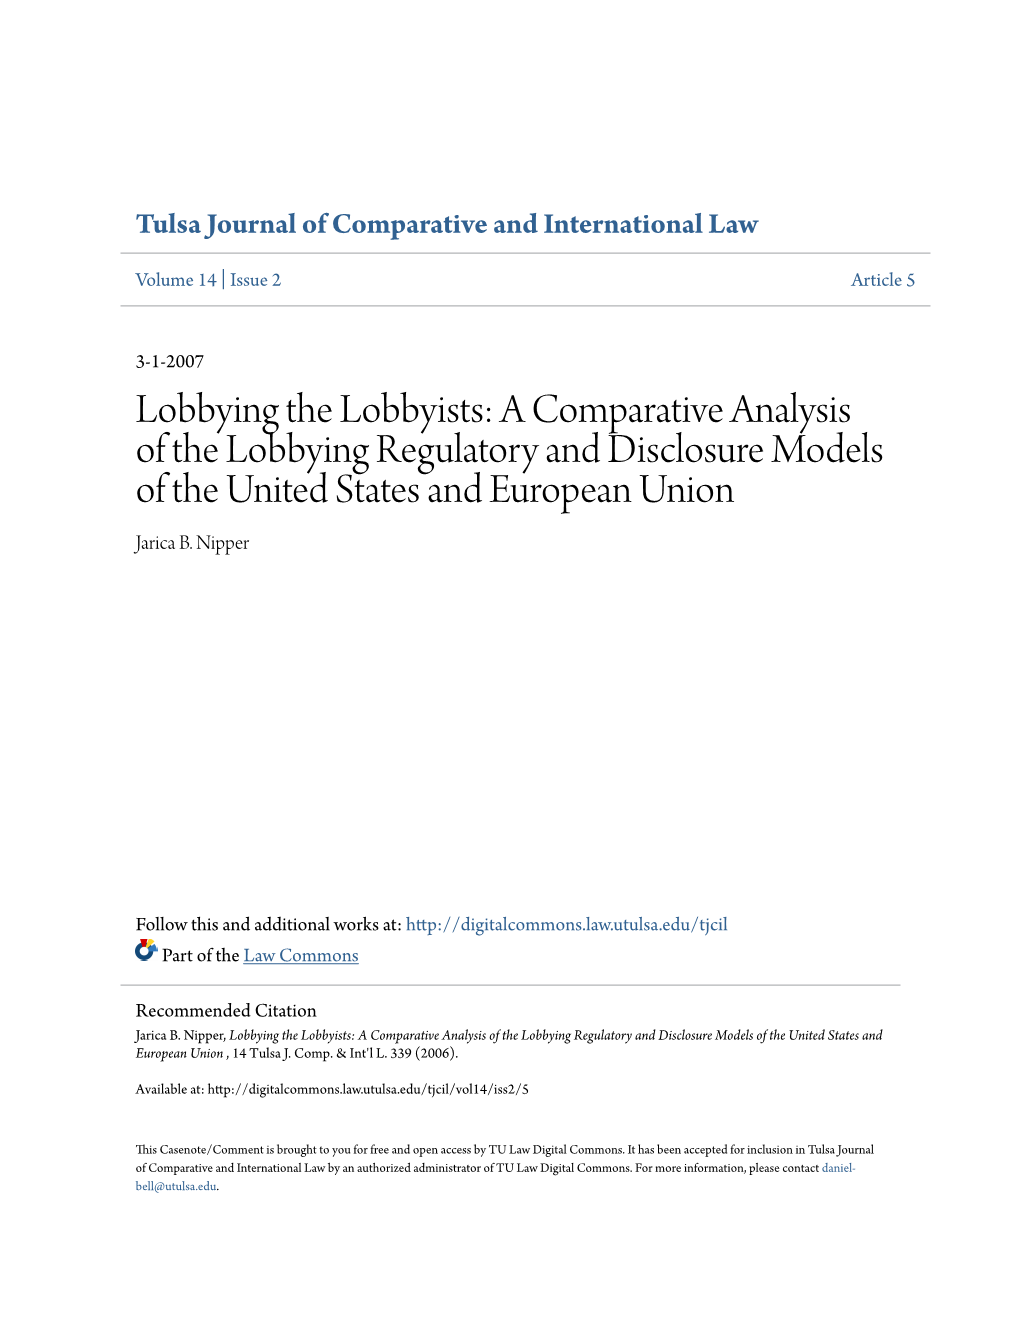 Lobbying the Lobbyists: a Comparative Analysis of the Lobbying Regulatory and Disclosure Models of the United States and European Union Jarica B